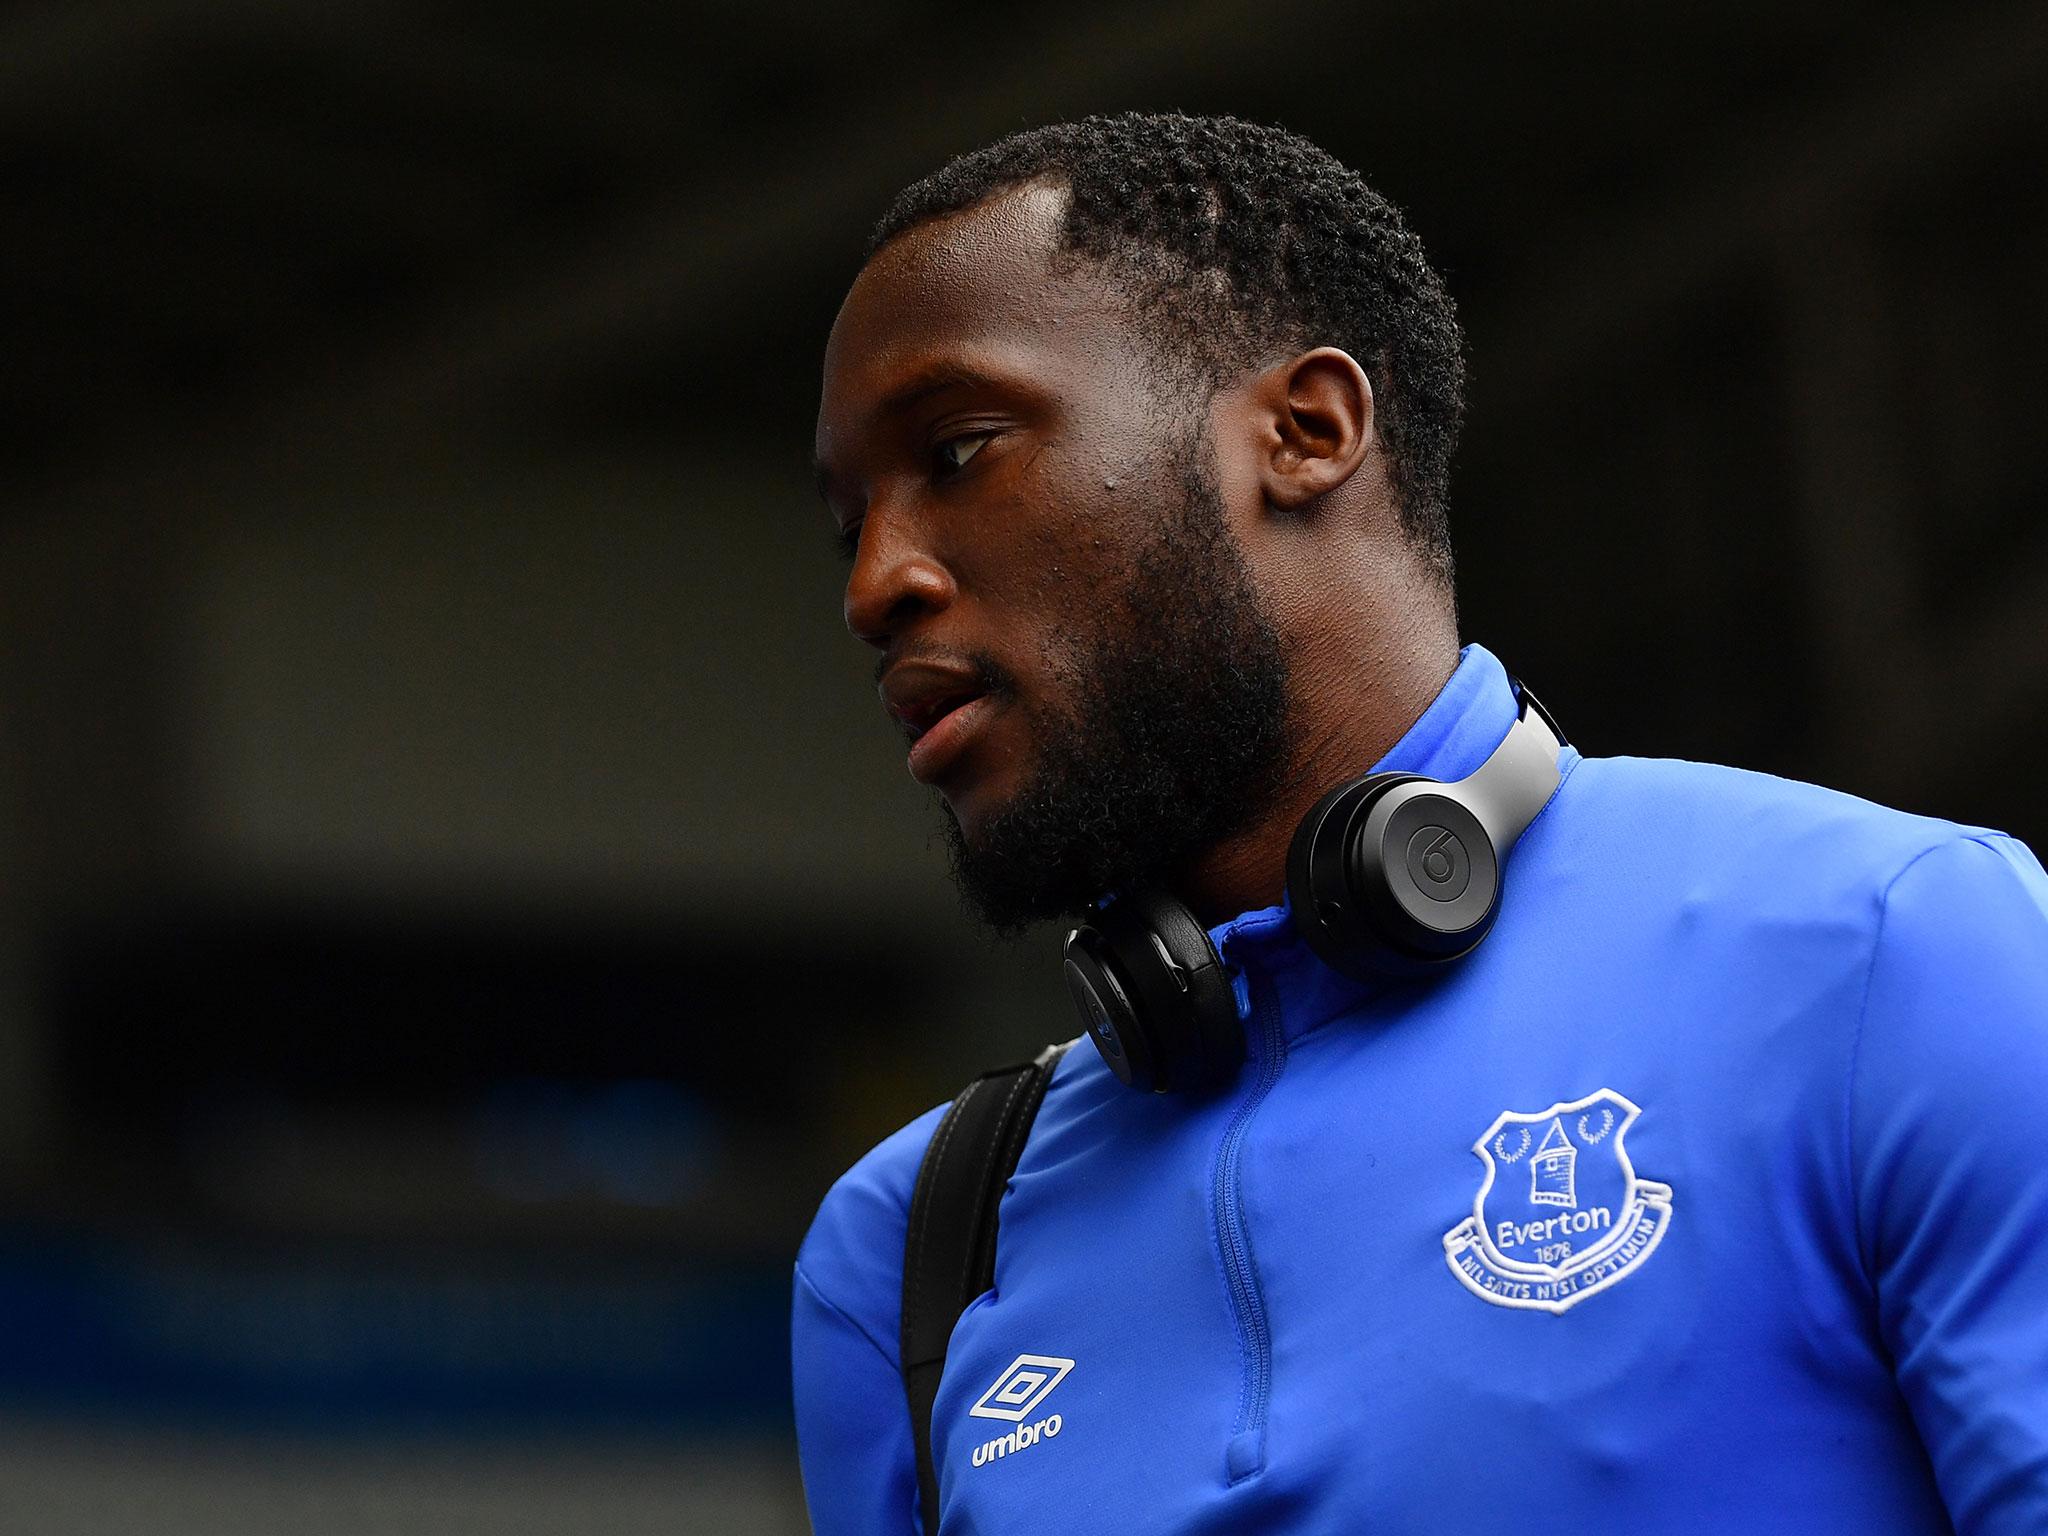 Lukaku's future remains in doubt after he revealed he would not be signing the contract extension being offered by Everton